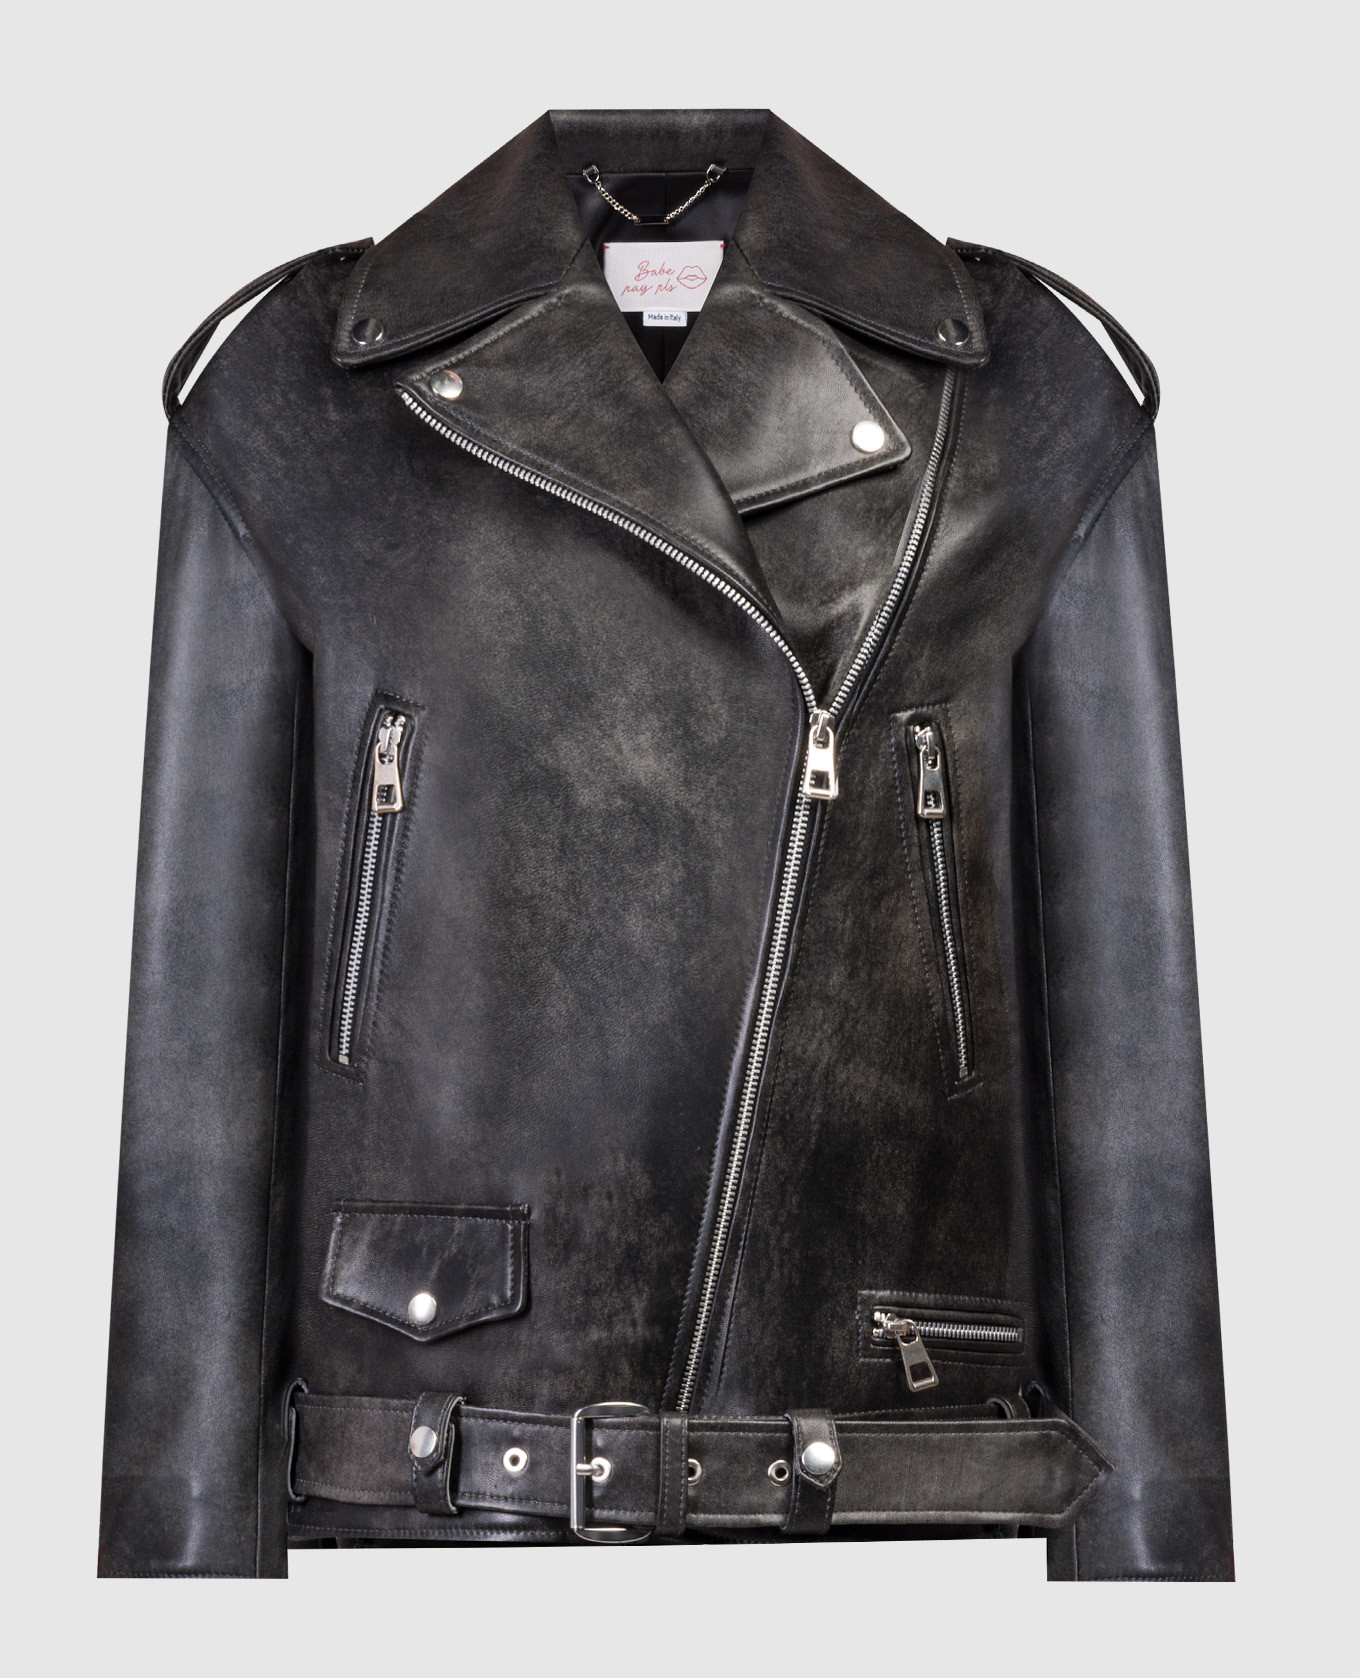 Black leather jacket with a worn effect